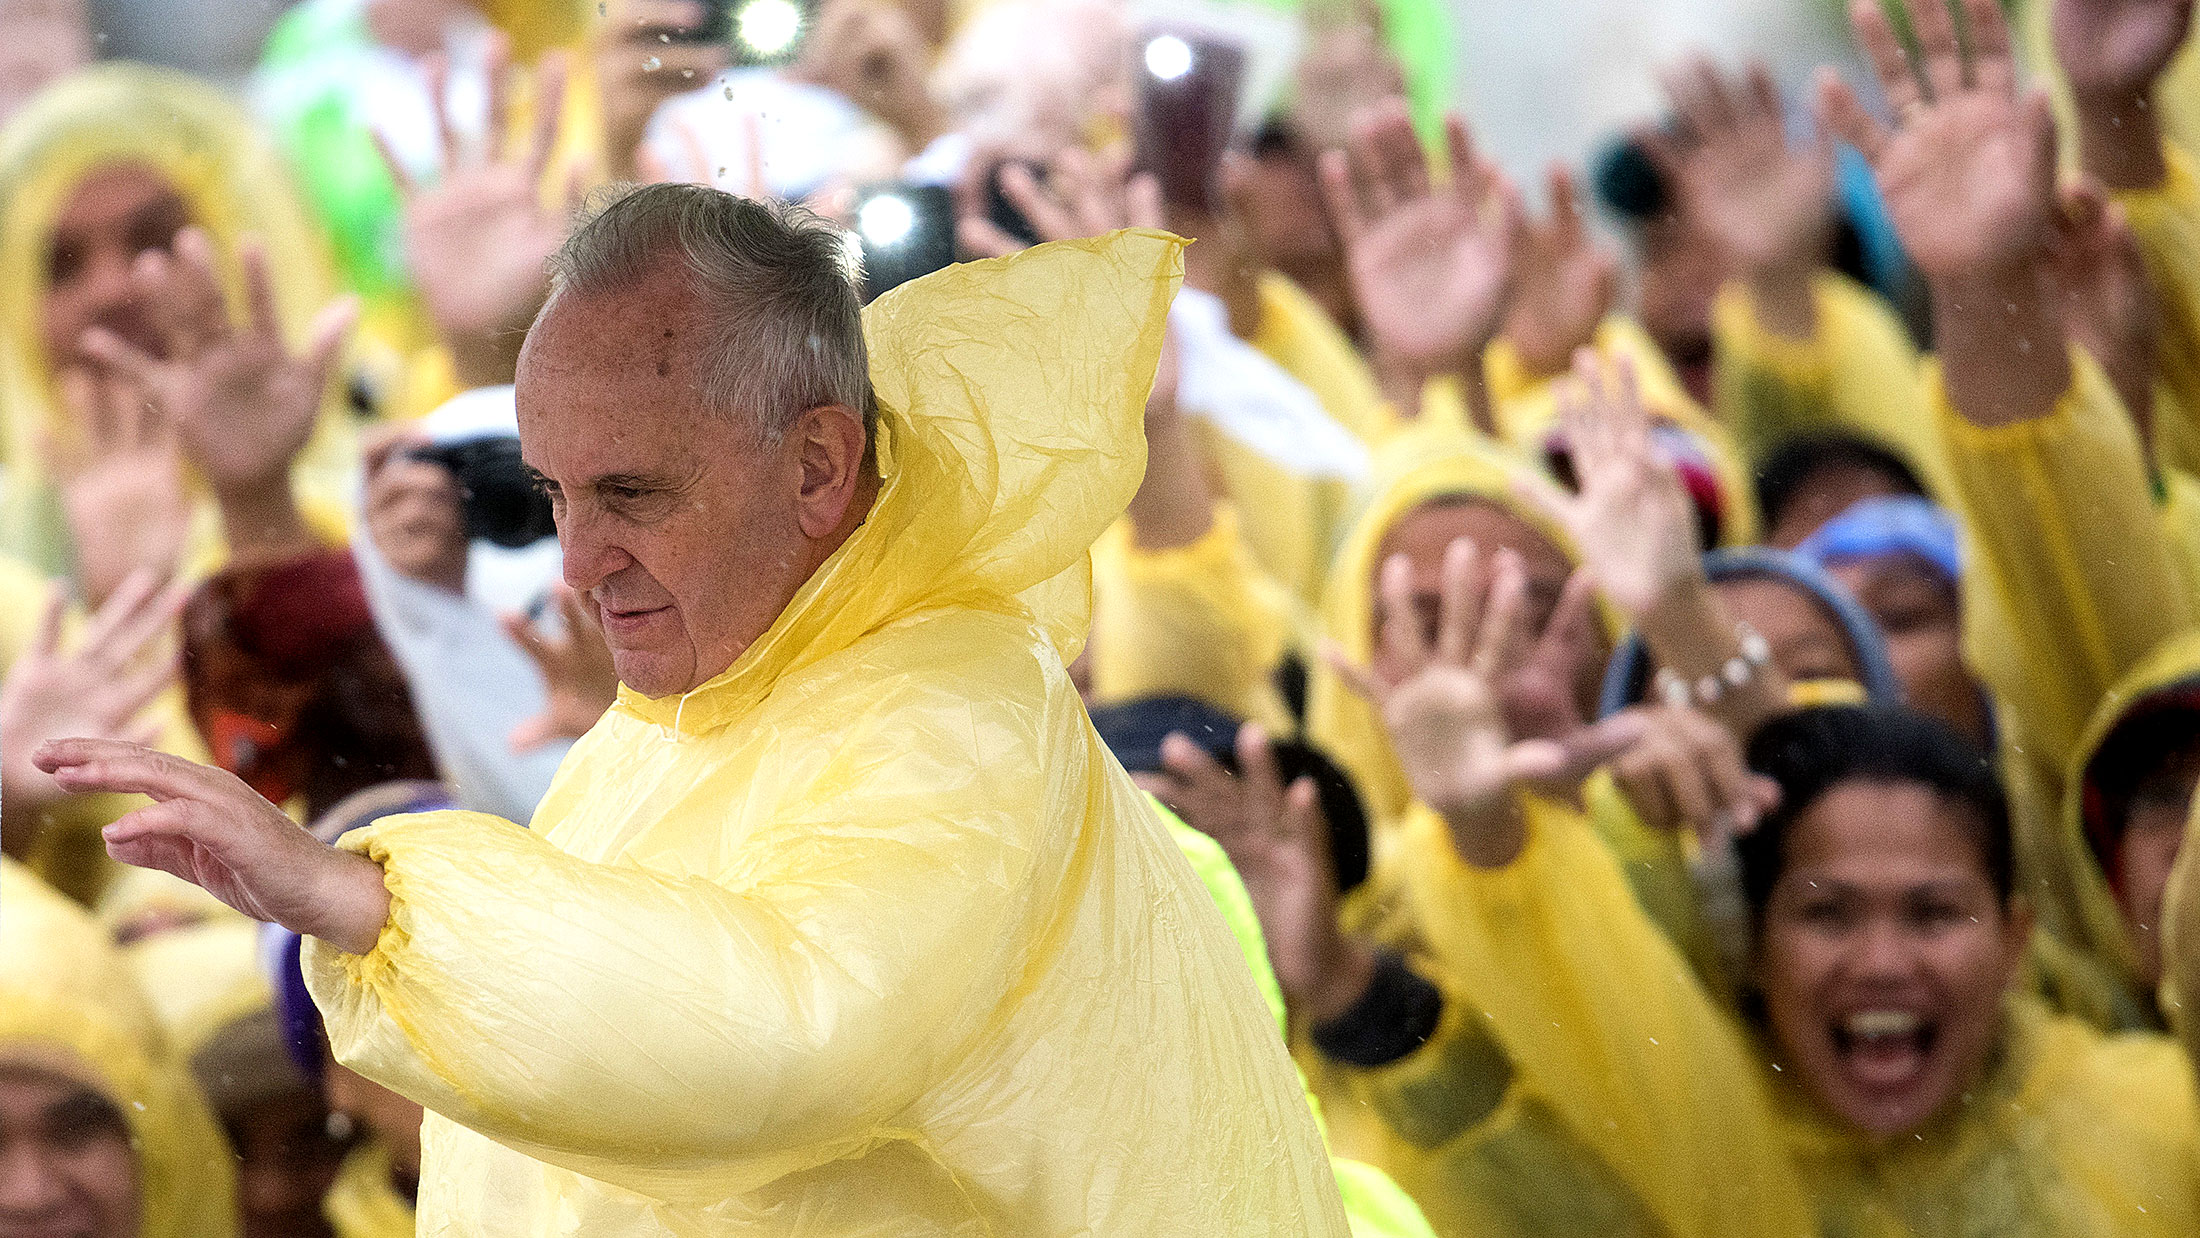 Pope Francis wears a plastic poncho as he waves to well-wishers after a mass in the Philippine city of Tacloban on Jan. 17, 2015.
